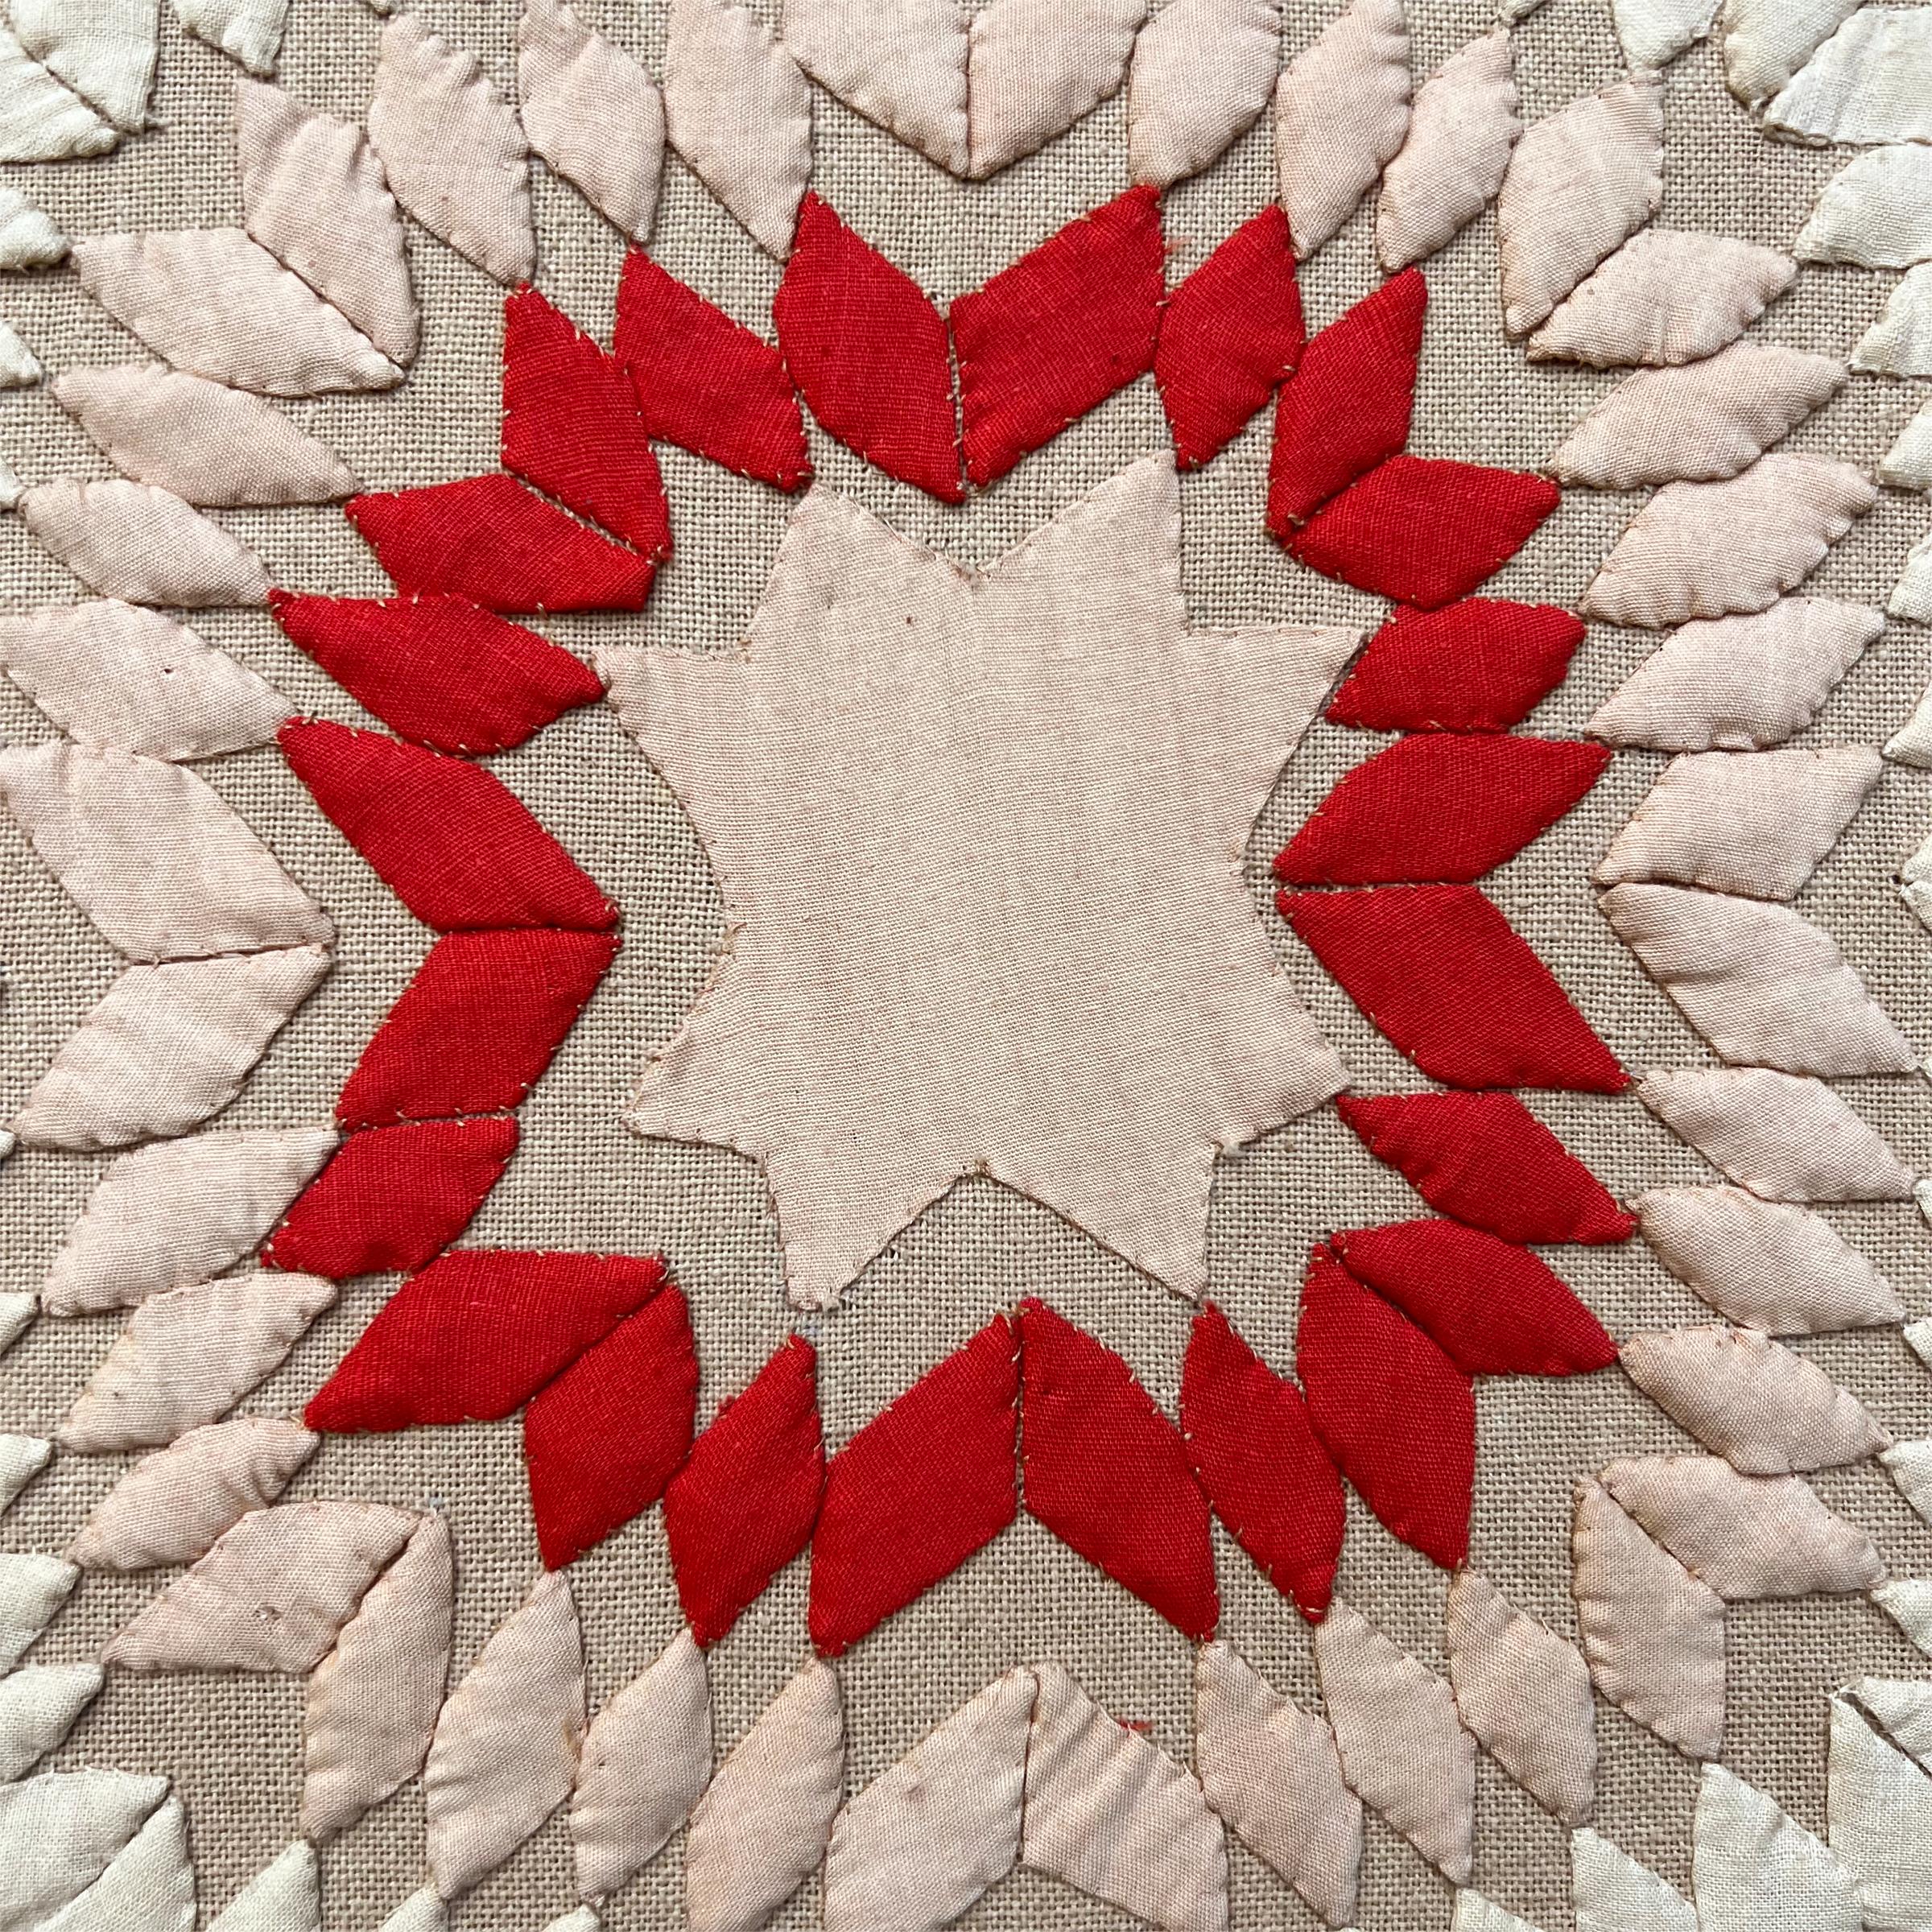 Mounted Late 19th Century American Appliqué Textile For Sale 1